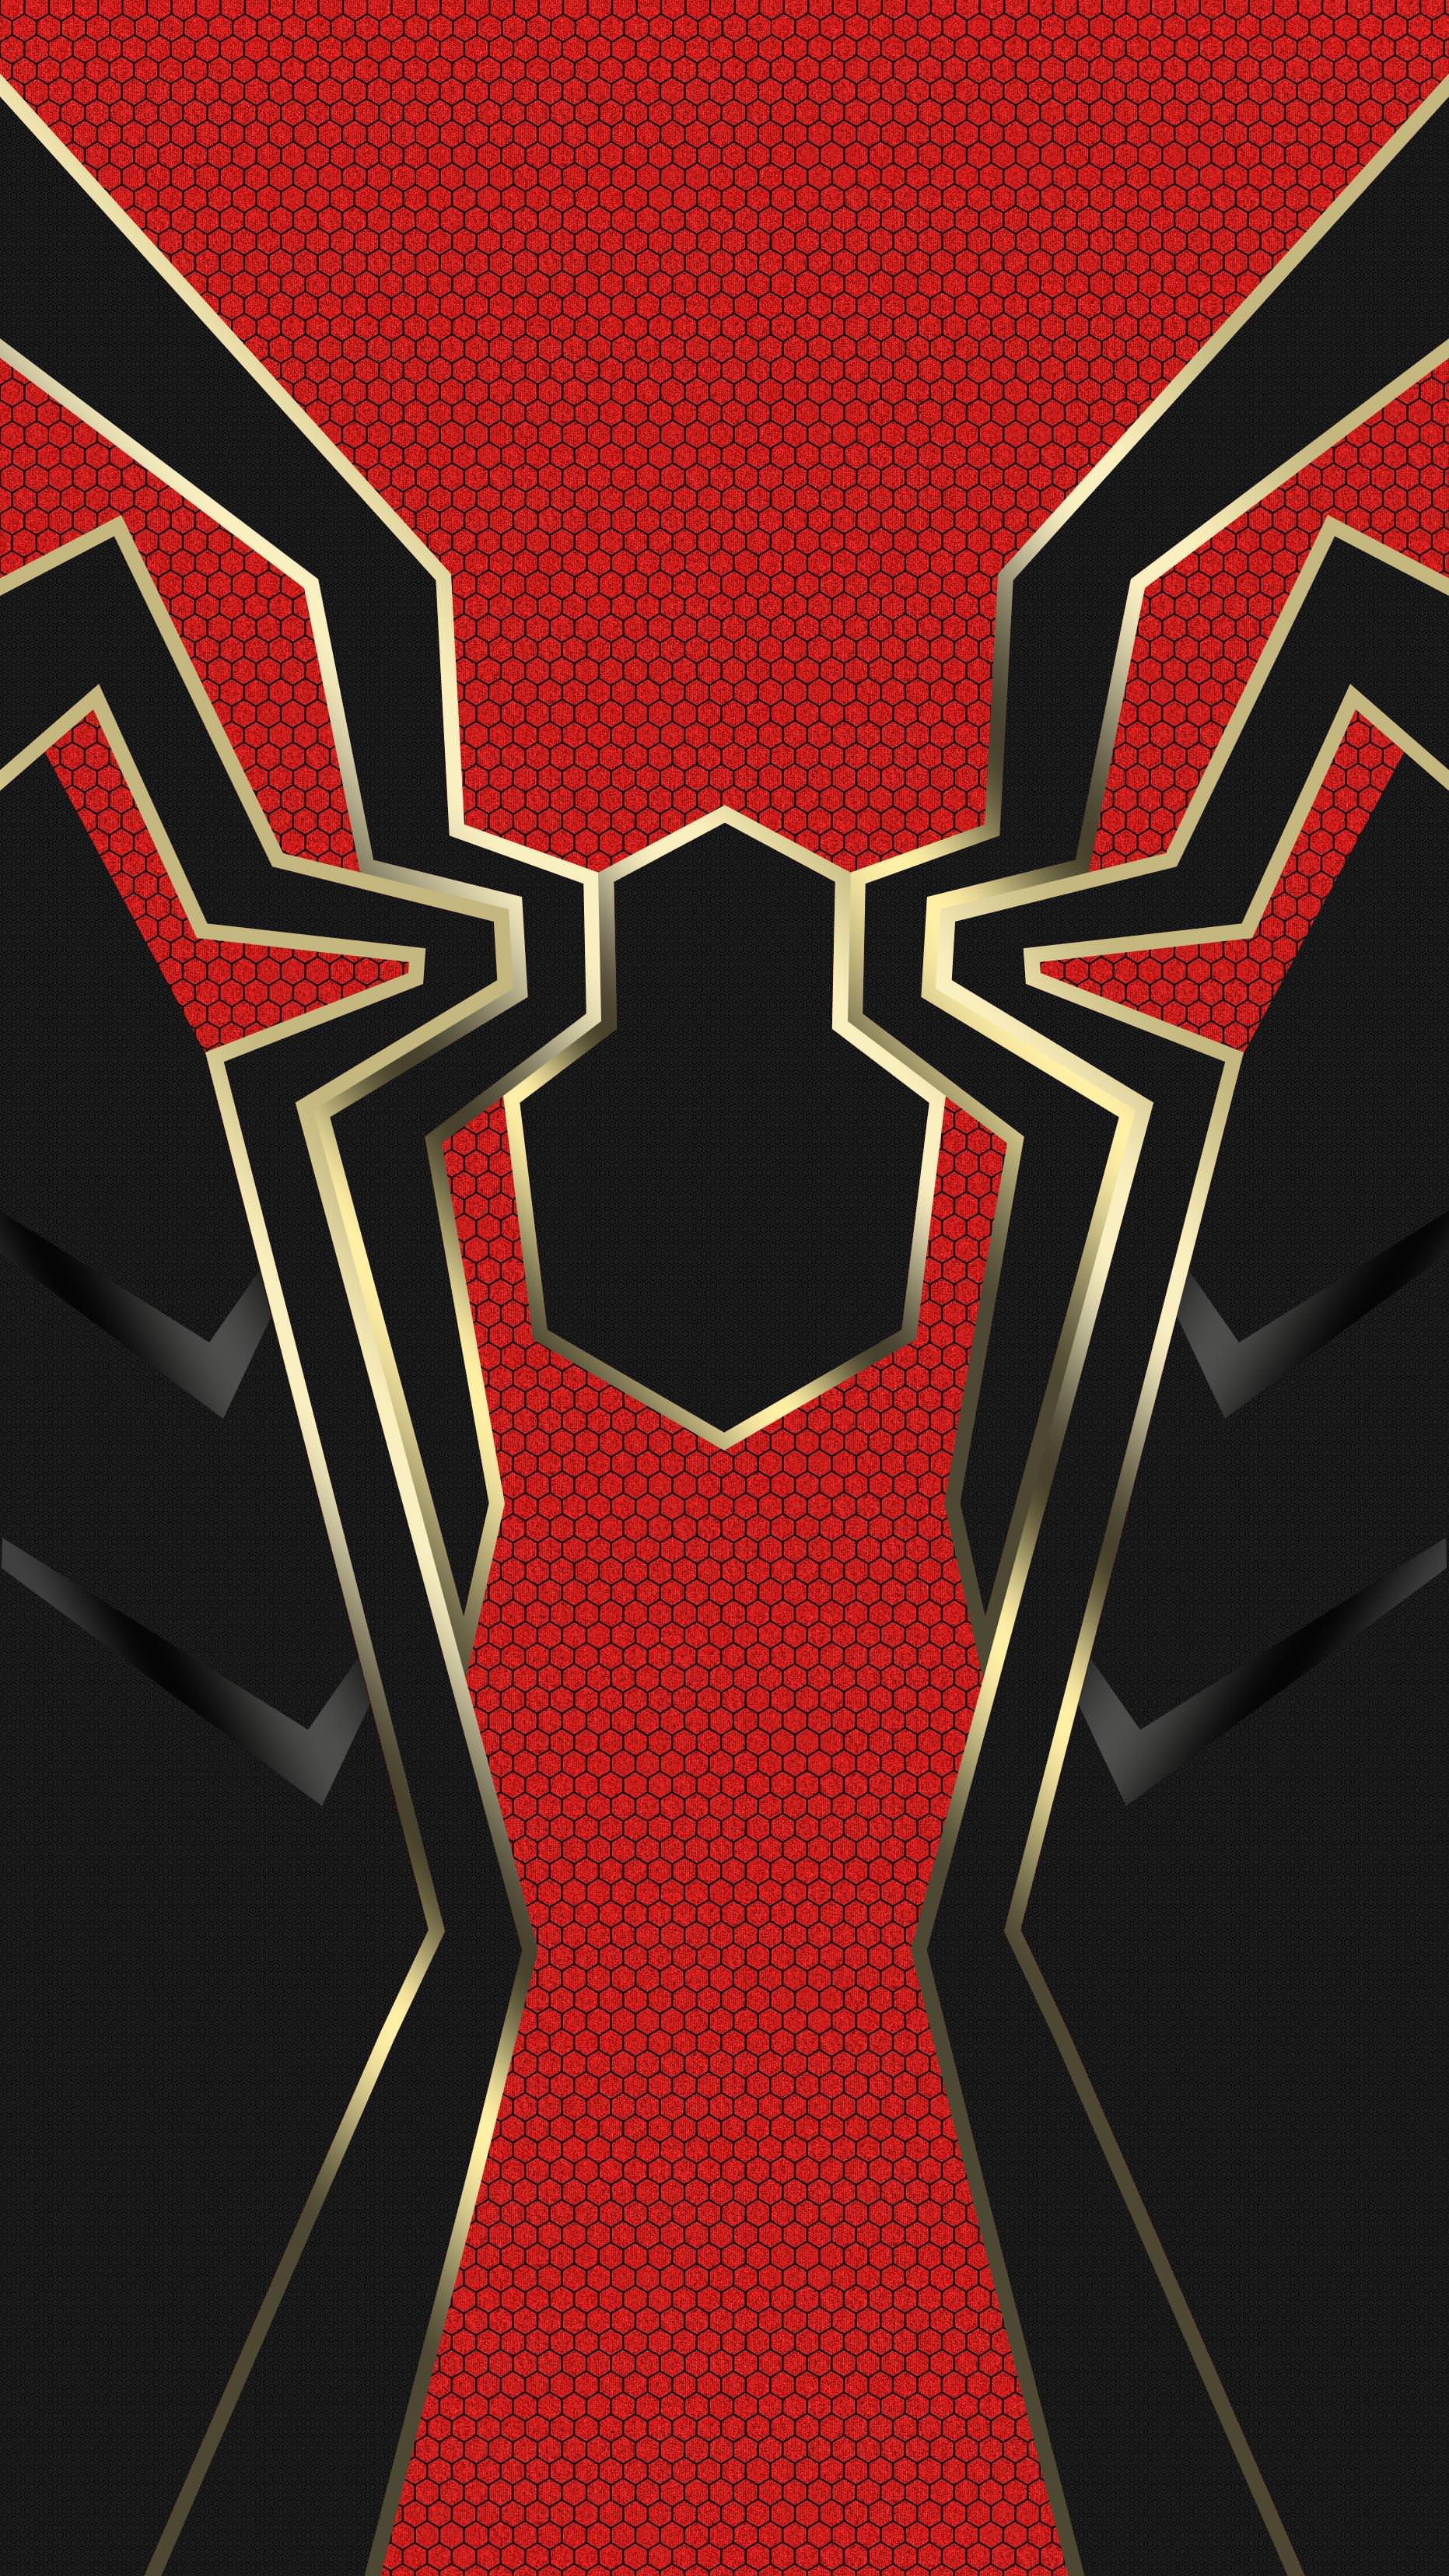 Created Spider Man Wallpaper Based Off The New Iron Spider Suit